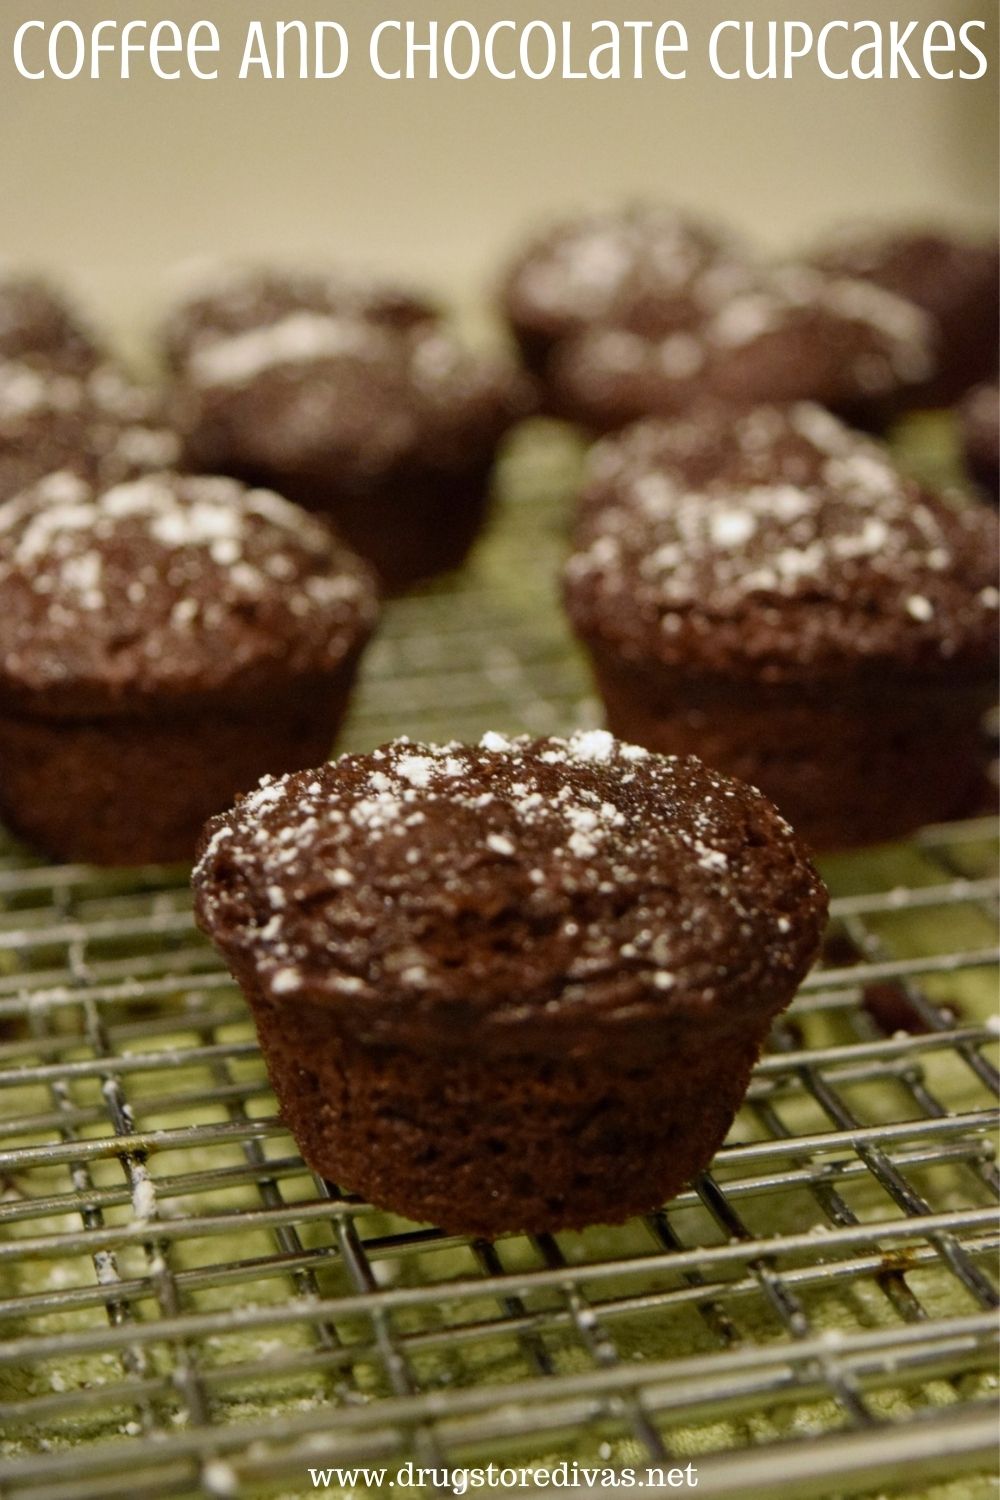 These coffee and chocolate cupcakes are only 3 ingredients -- and have a full cup of coffee in the batter. Get the recipe at www.drugstoredivas.net.